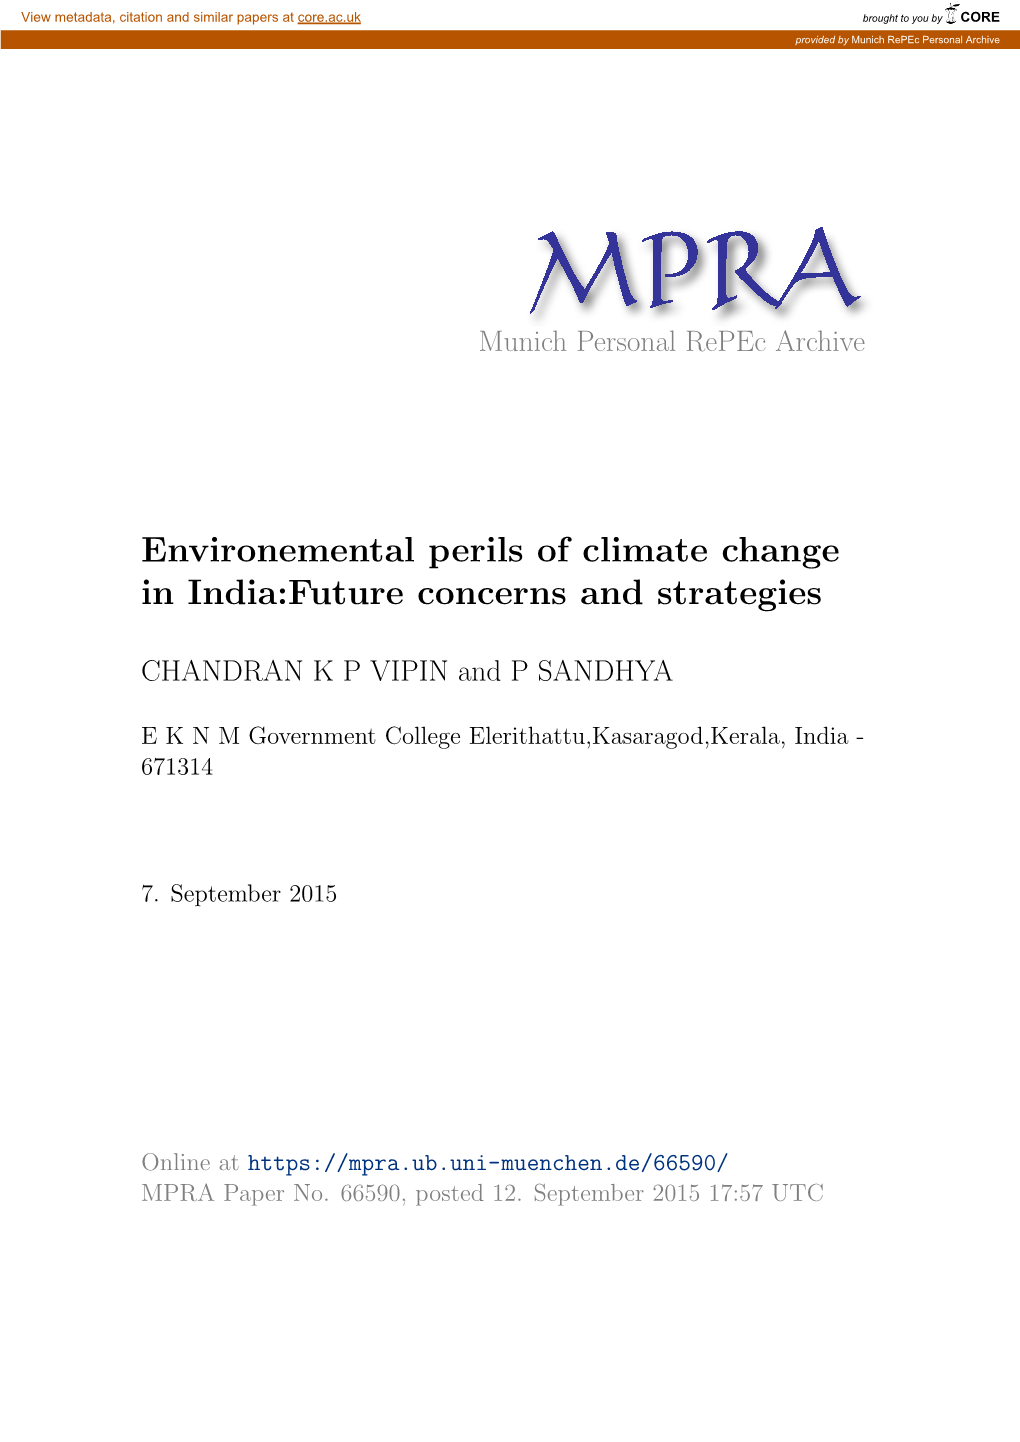 Environemental Perils of Climate Change in India:Future Concerns and Strategies